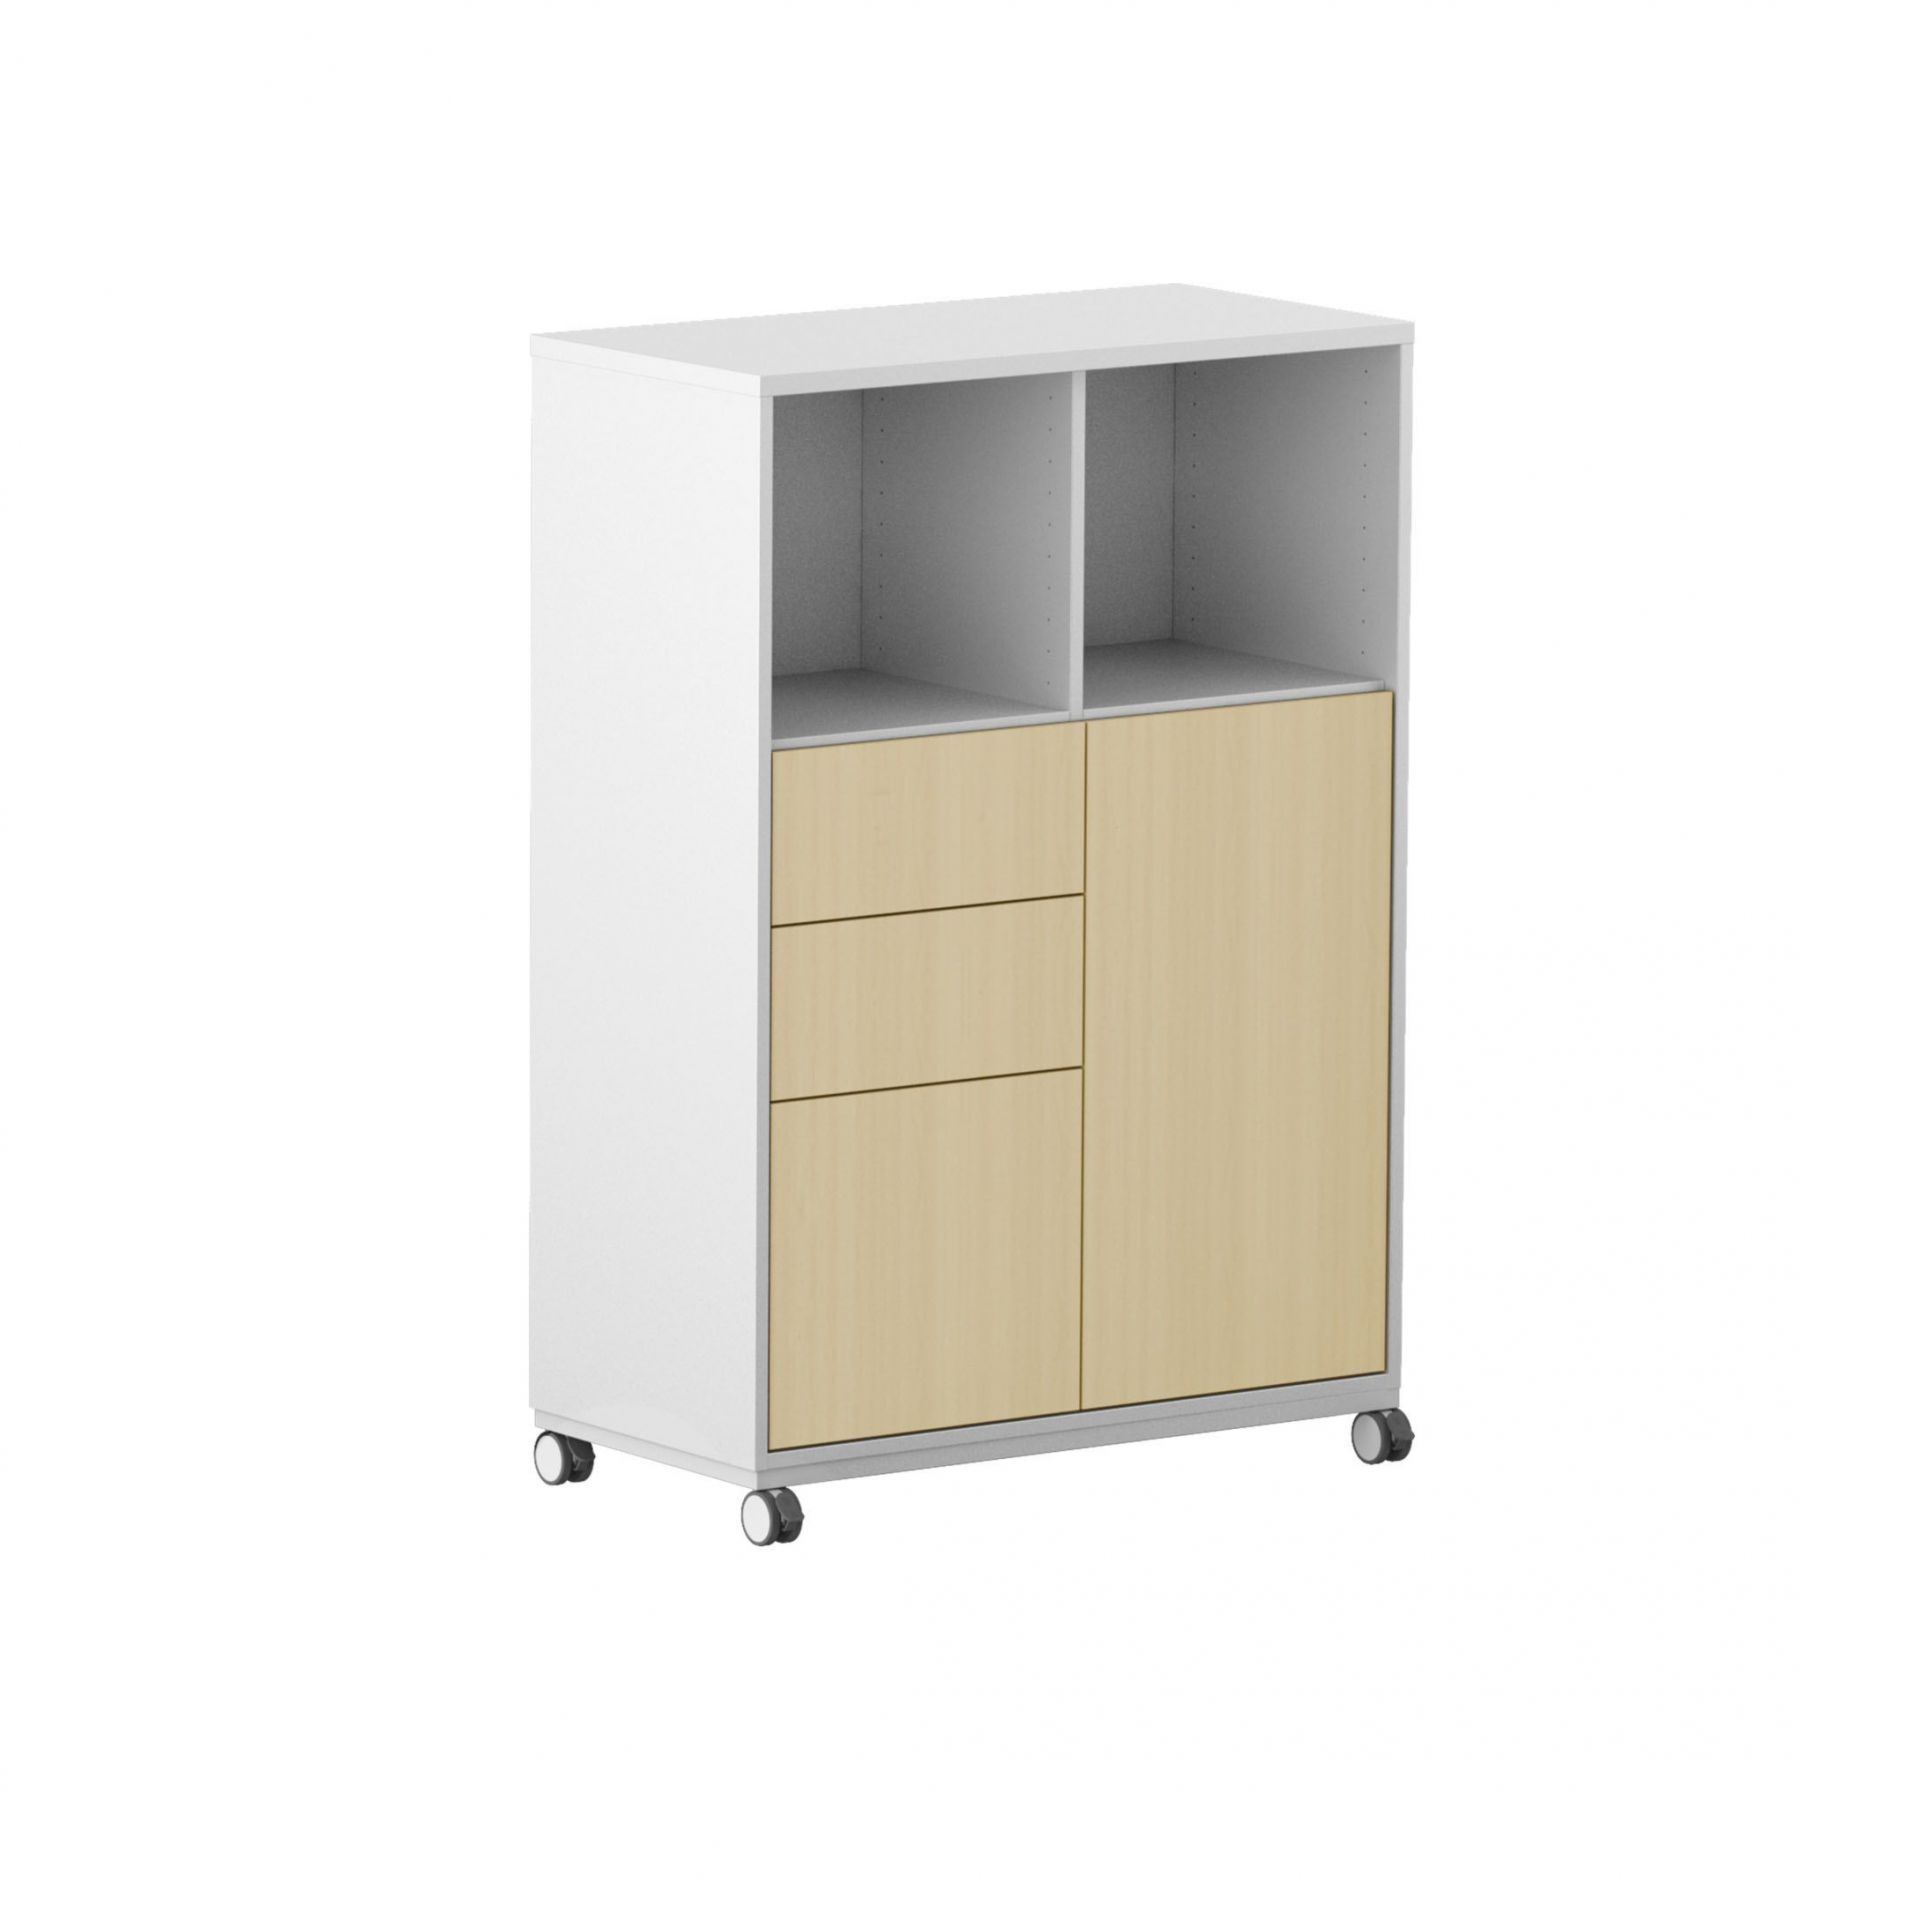 Pulse Storage with doors and drawers product image 3